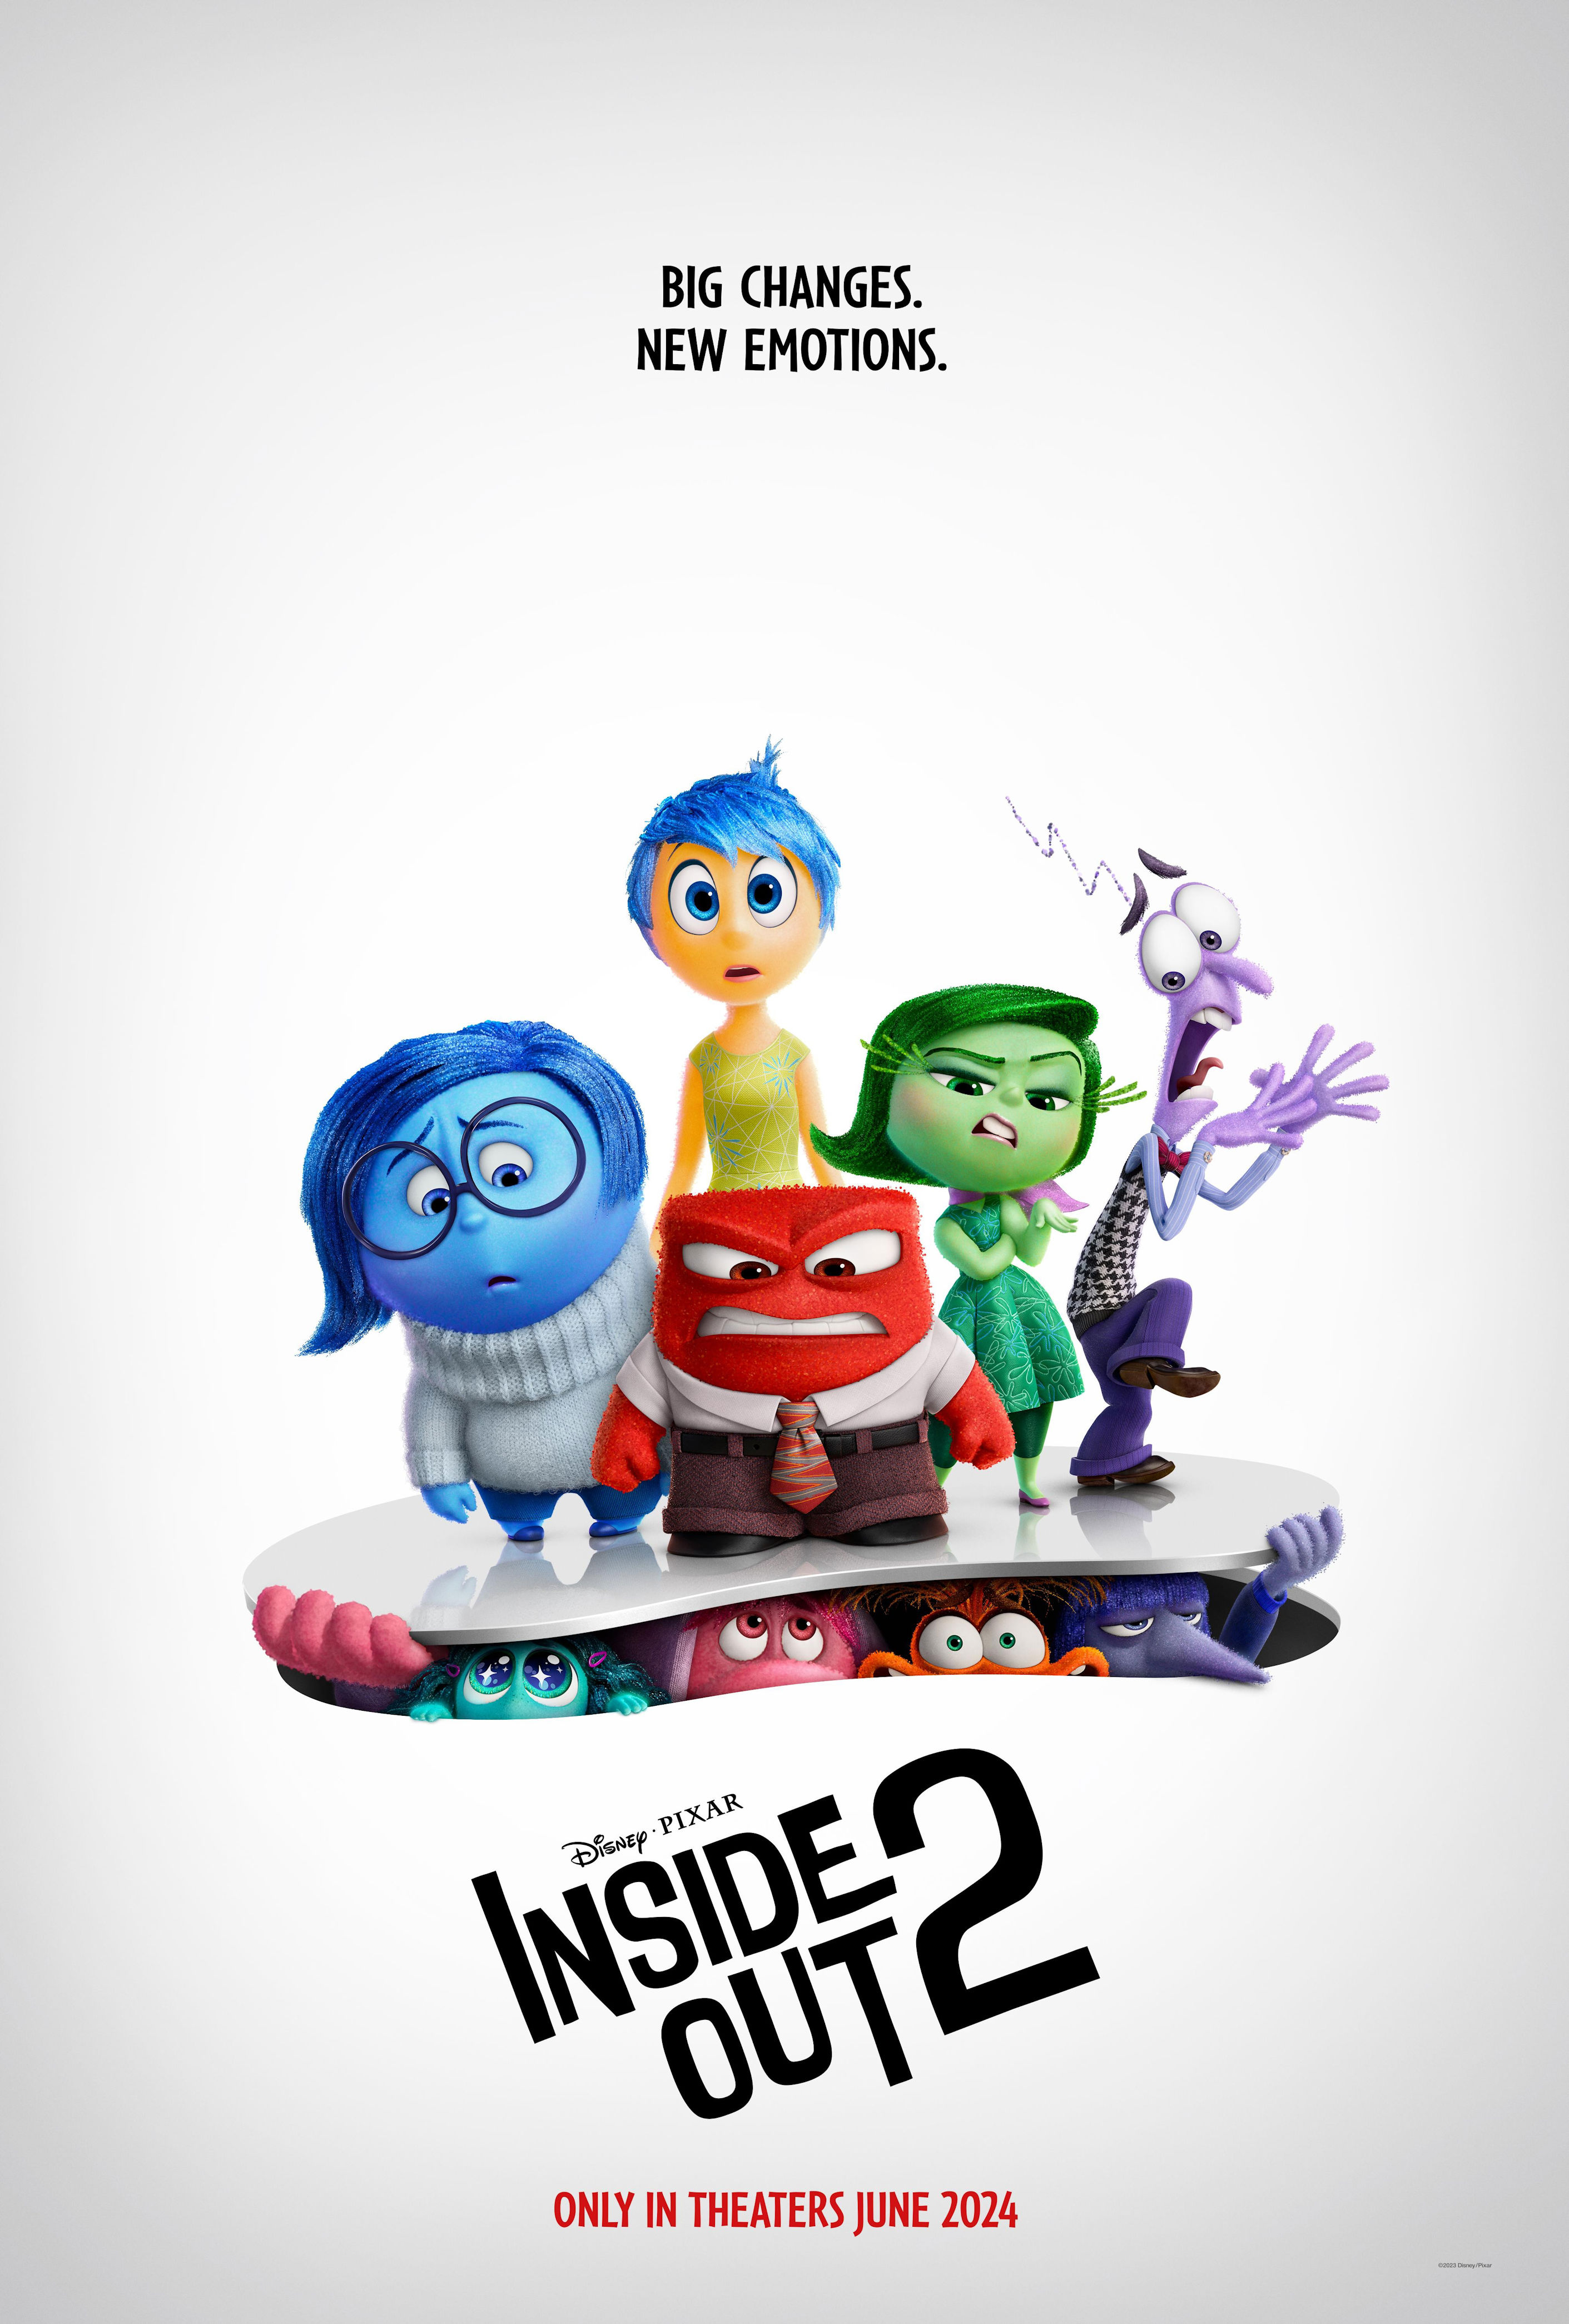 Like all Pixar sequels, <em>Inside Out 2</em> has evolved with its main character Riley as she grows into a teenager. But that means there's a new emotion in town — Anxiety — and she's not going anywhere (don't I know it). This summer movie promises to be just as colorful and emotional as the first one, and I can't wait to cry in my chair at the theater. Watch the Inside Out 2 trailer <strong>here</strong>. <em>Inside Out 2 hits theaters June 14, 2024 and stars Lewis Black, Tony Hale, Maya Hawke, Liza Lapira, Diane Lane Amy Poehler, and Phyllis Smith.</em>